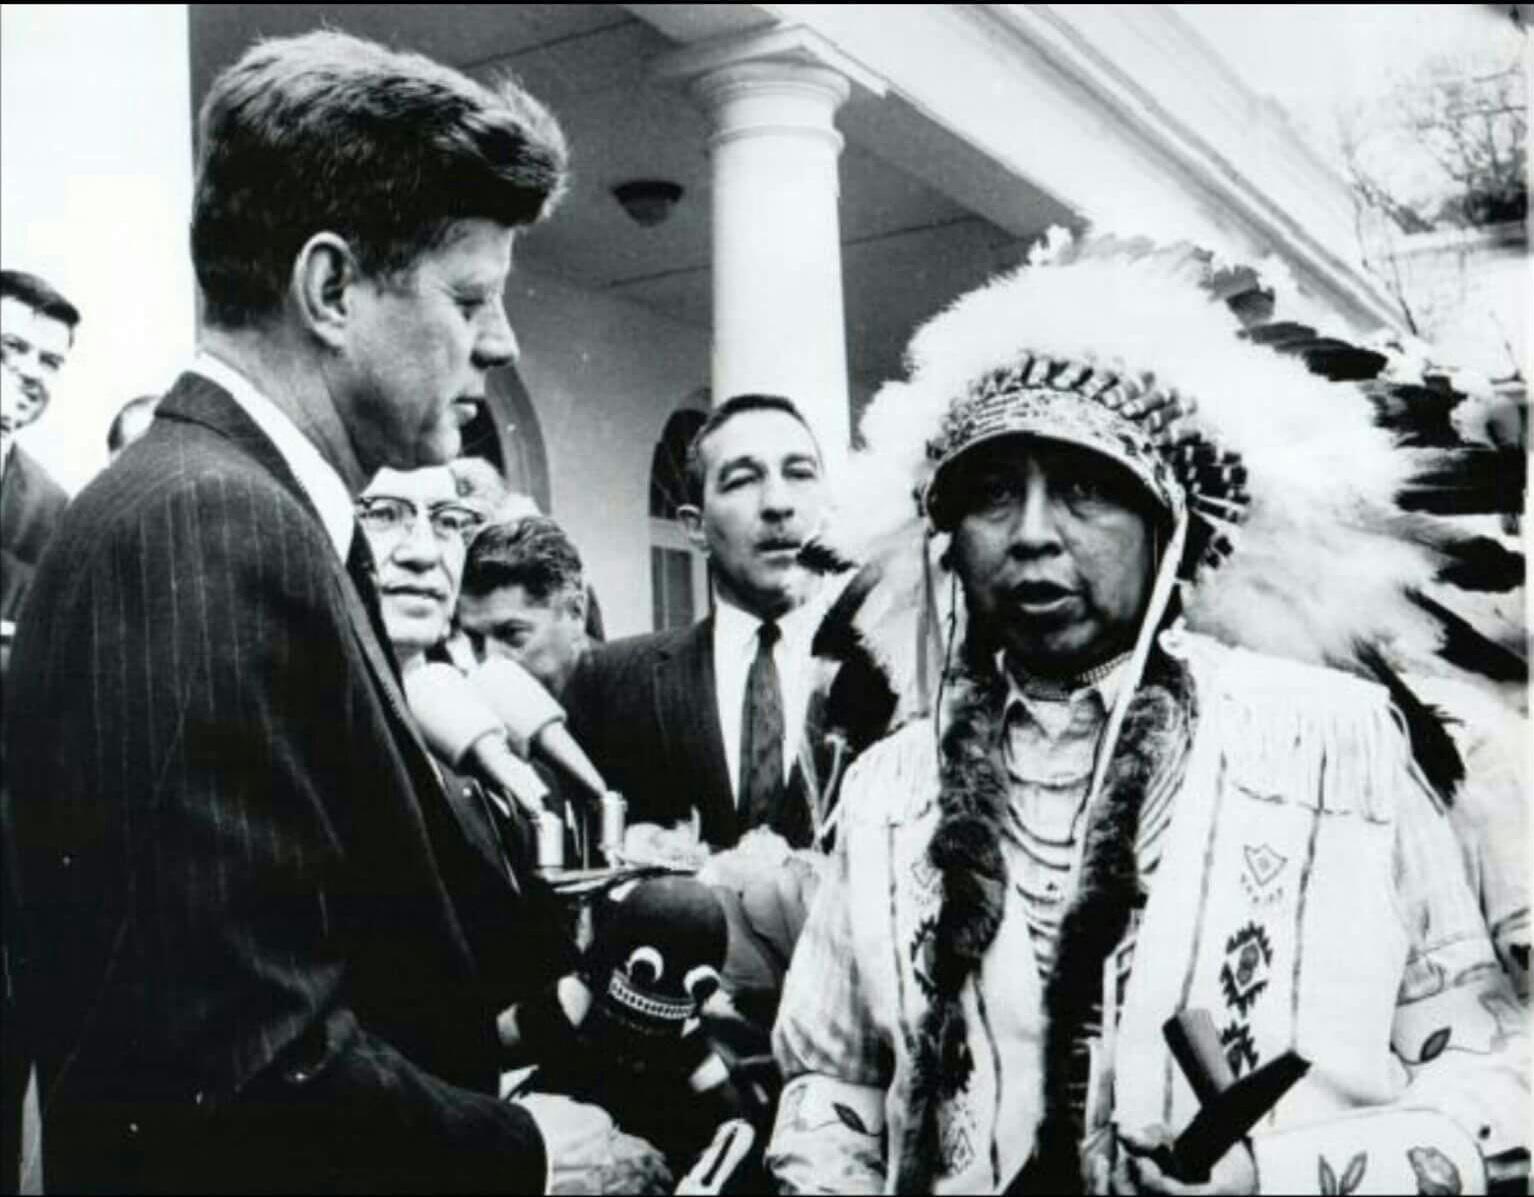 Edison Real Bird, a chairman of the Crow Tribe, meets with President John J. Kennedy during a 1962 event at the White House. (Courtesy Karis Jackson)